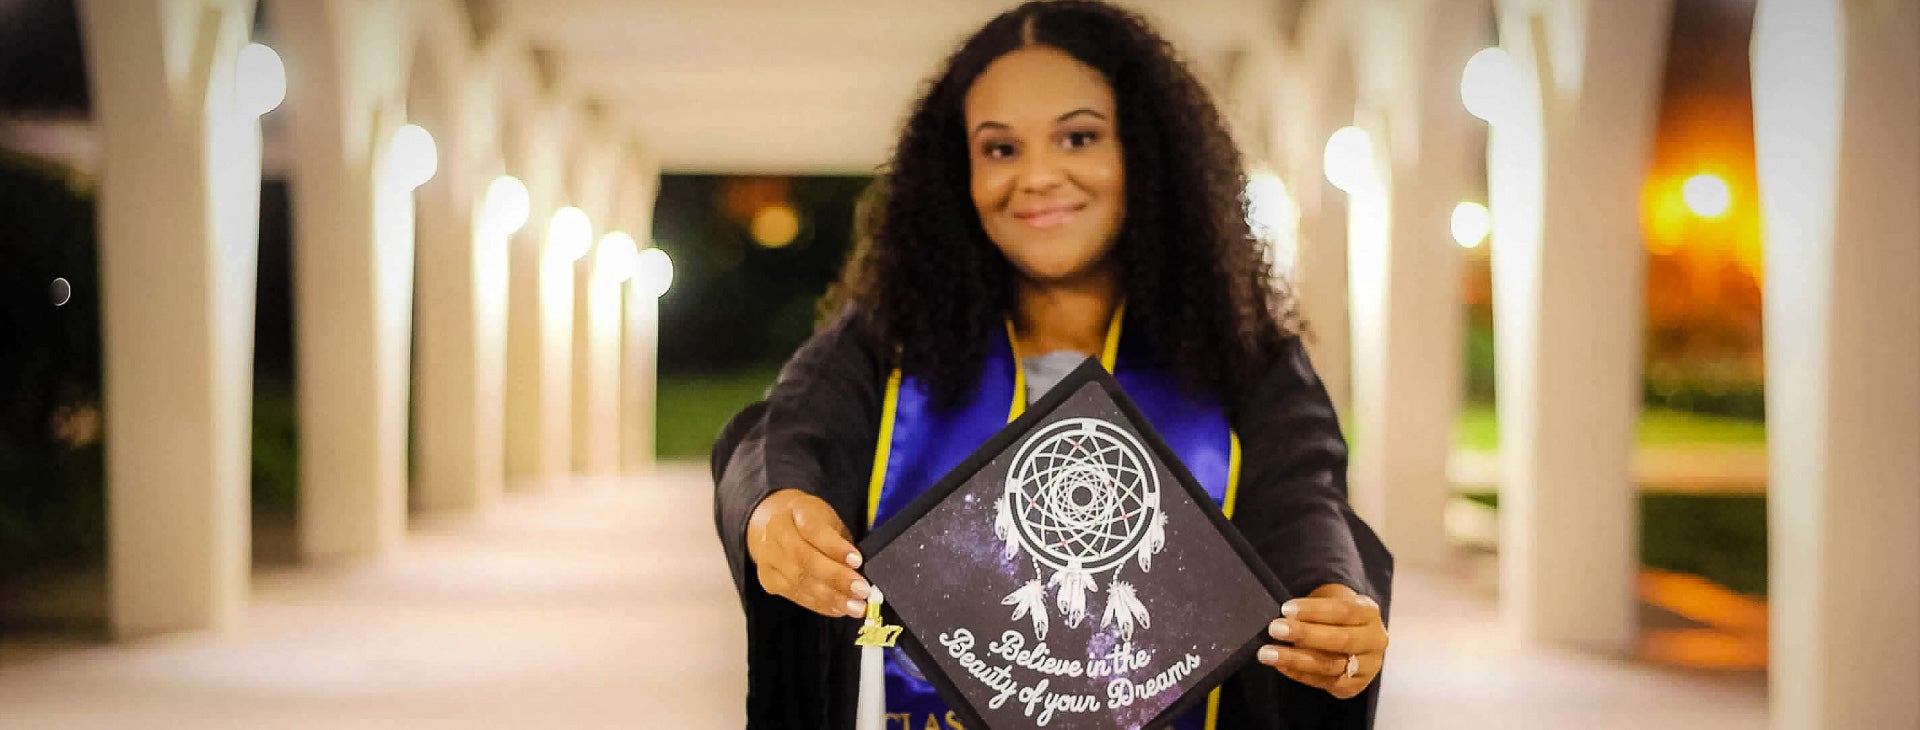 Photo of student holding a graduation cap that says "Believe in the Beauty of Your Dreams."